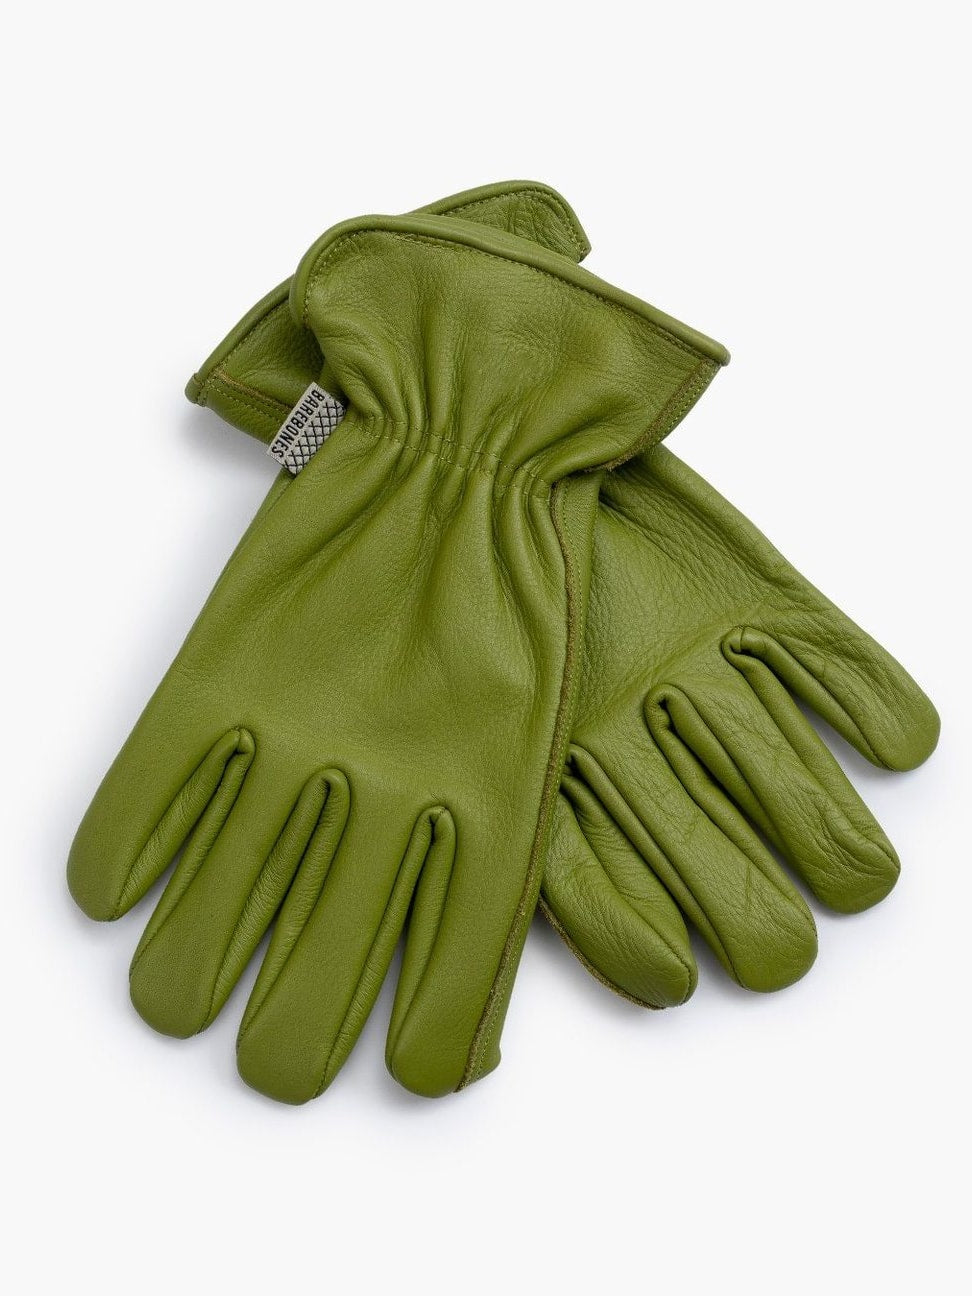 A pair of Barebones Classic Work Gloves – Olive on a white background.